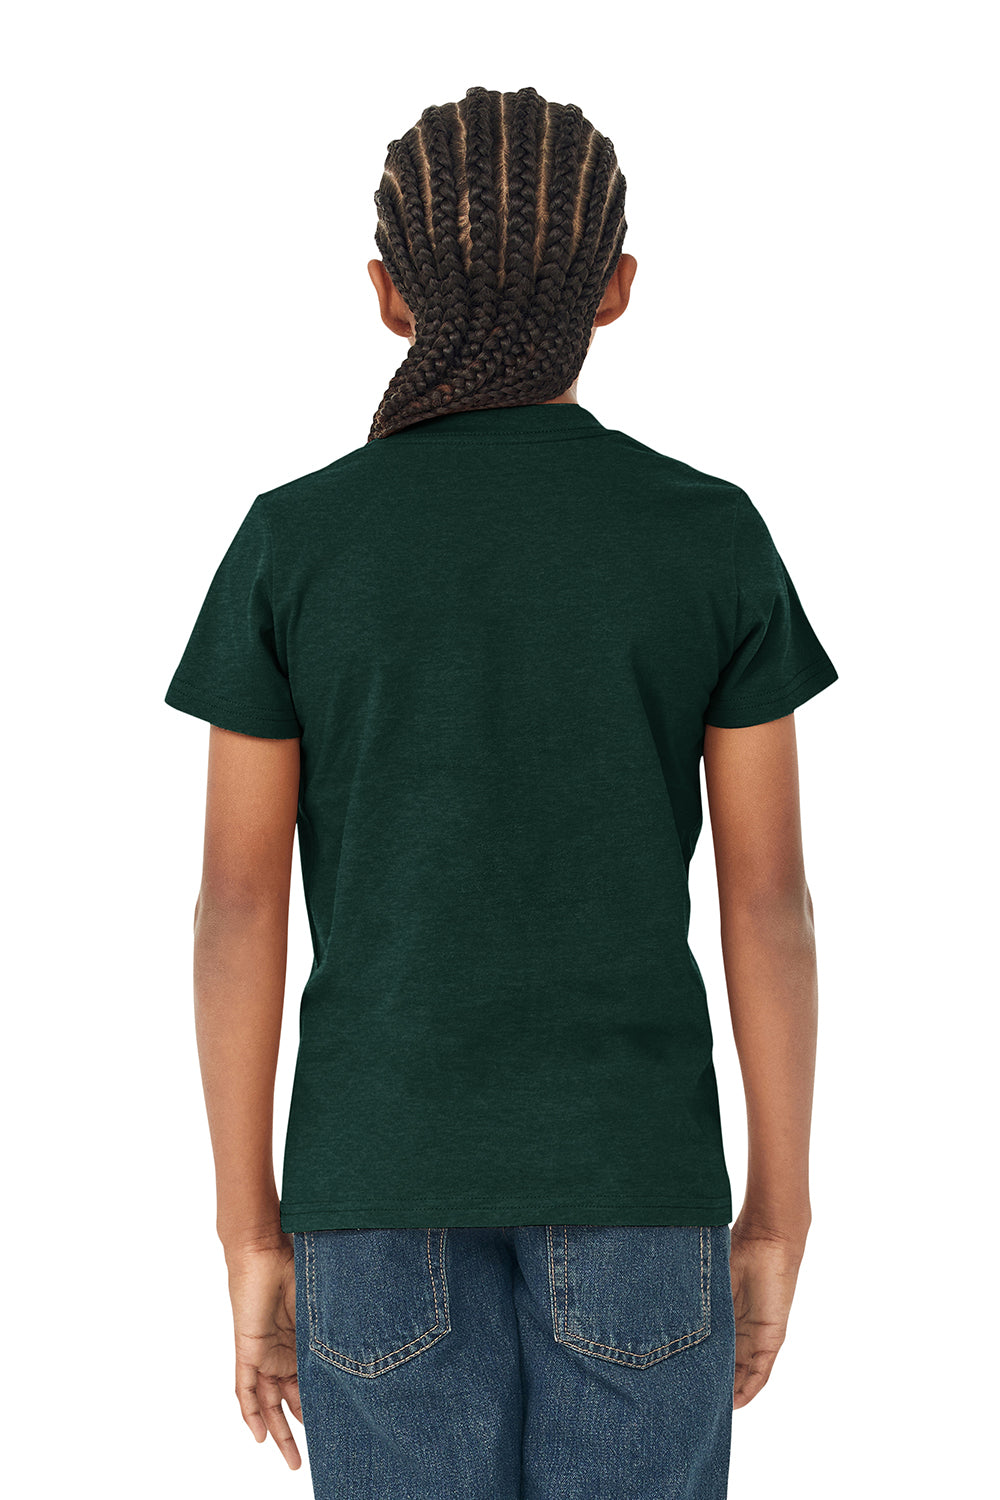 Bella + Canvas 3001Y Youth Jersey Short Sleeve Crewneck T-Shirt Heather Forest Green Model Back